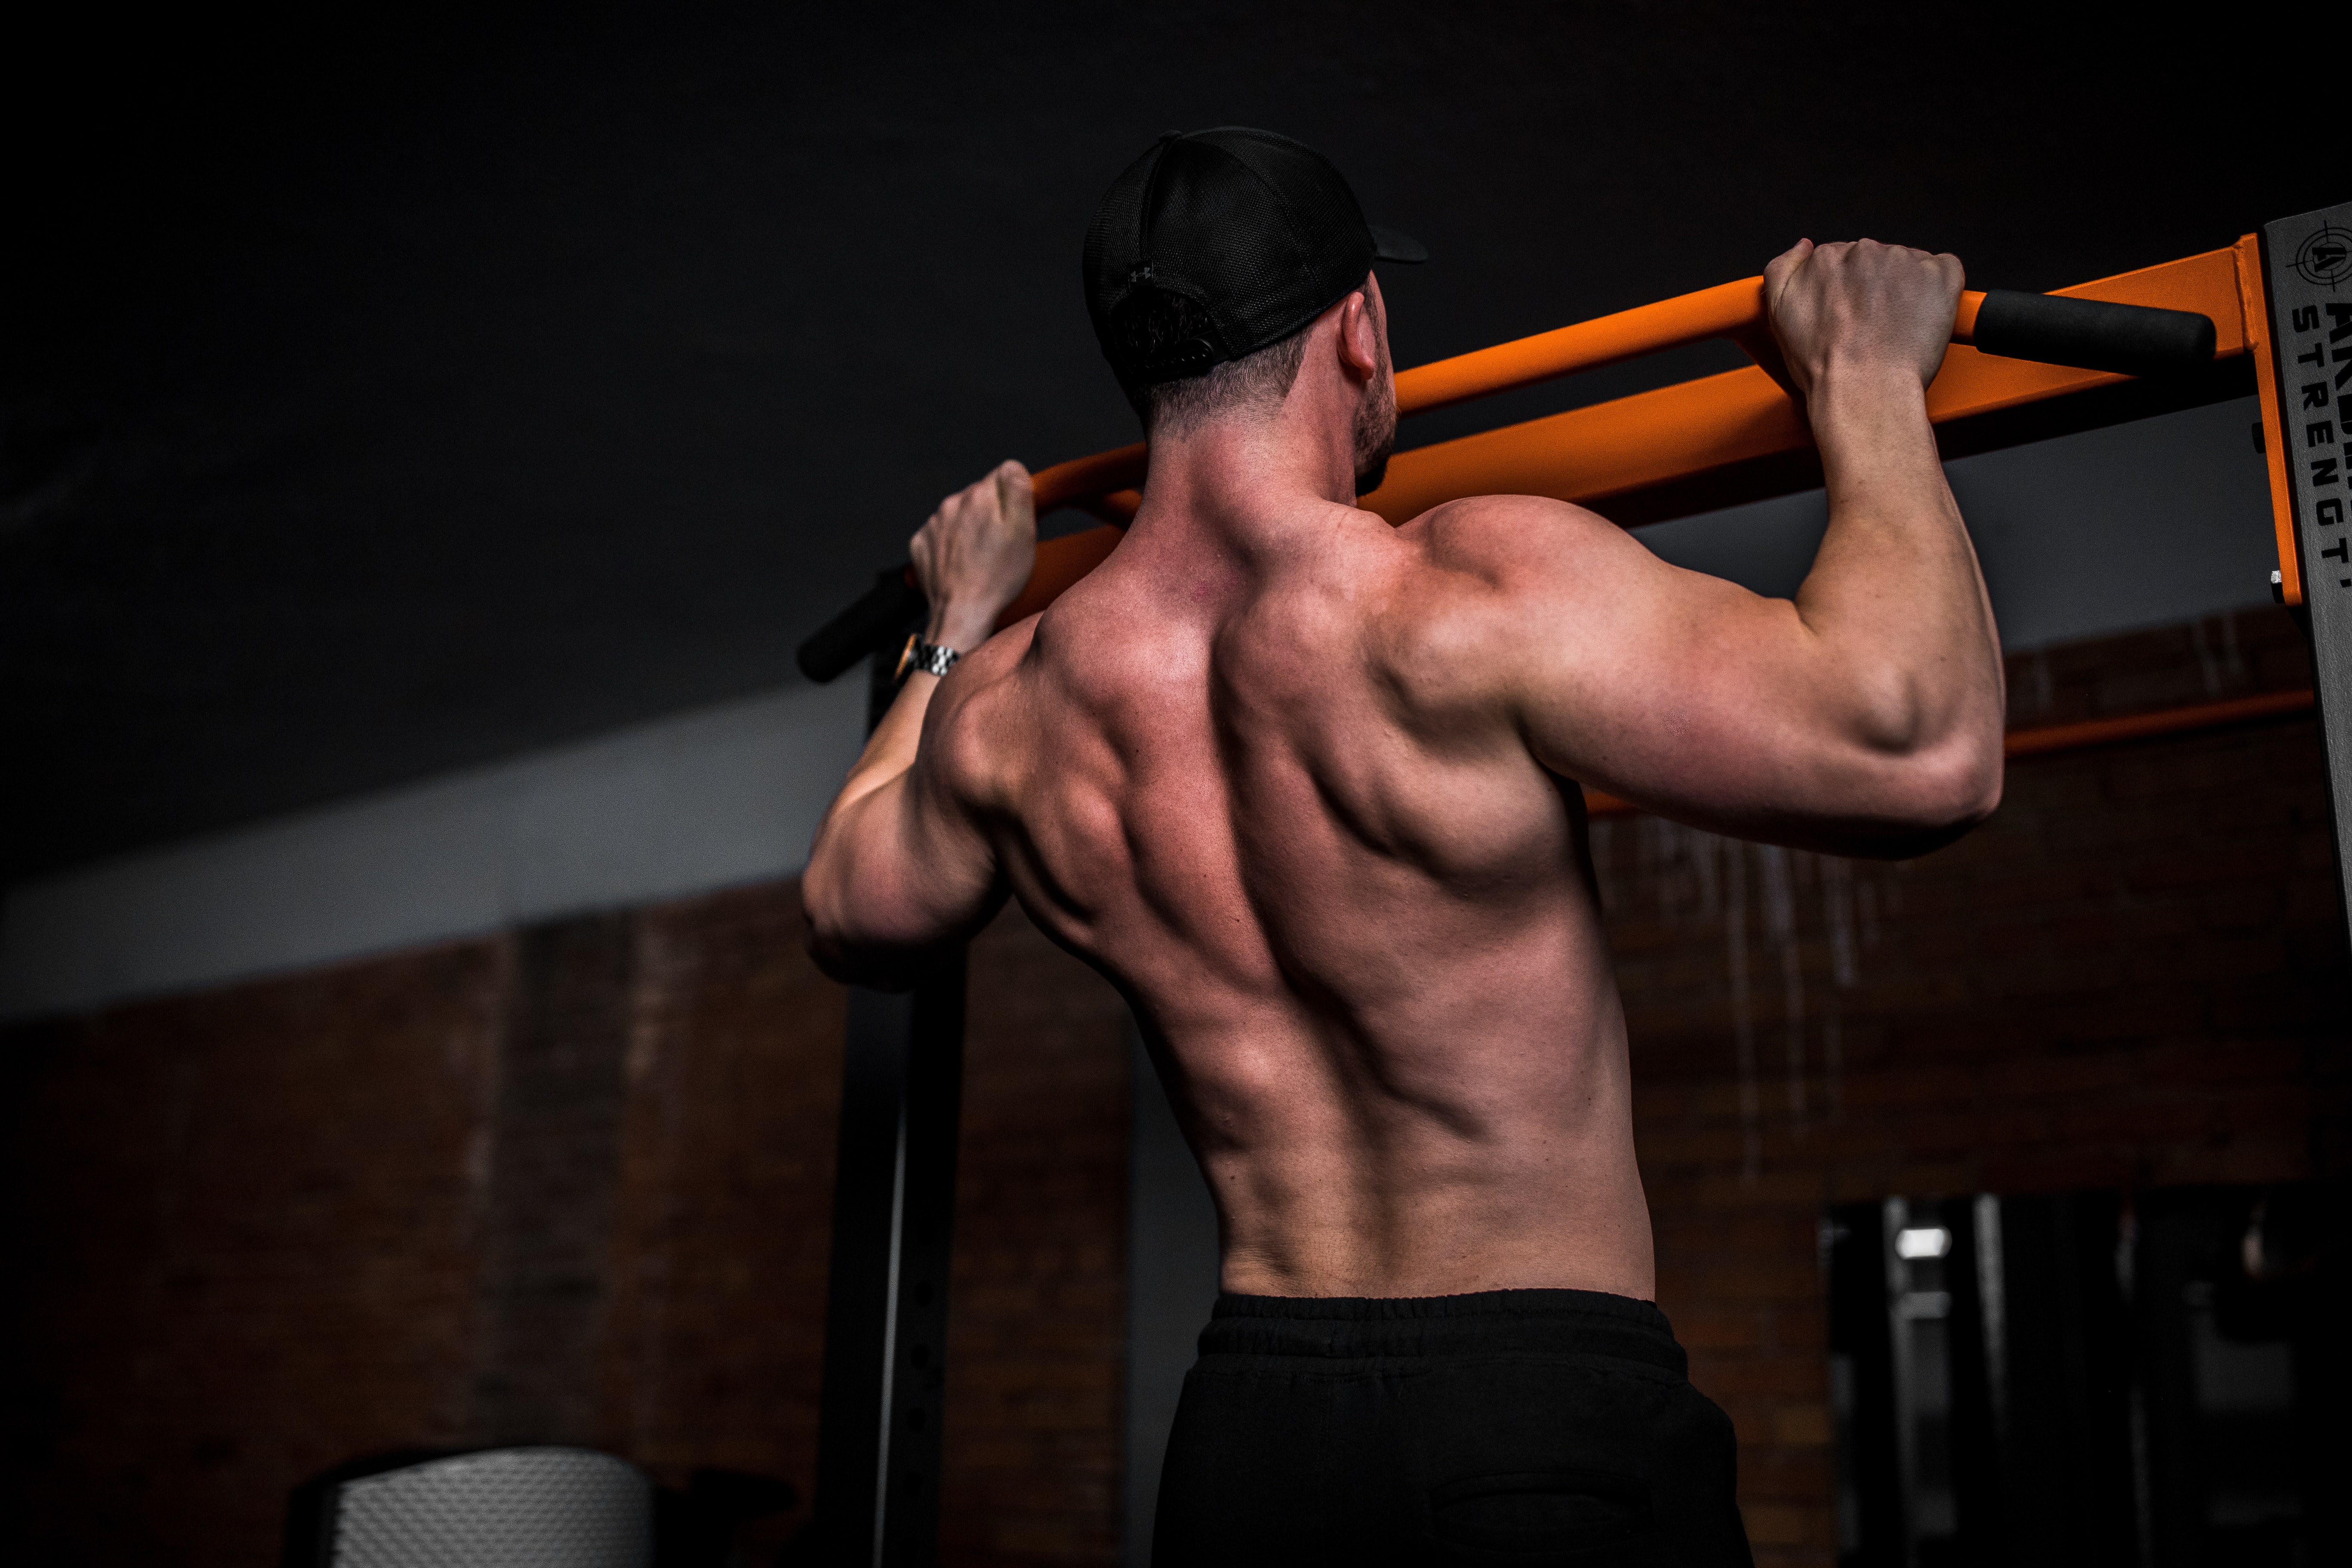 Top 10: Reasons for effective back training